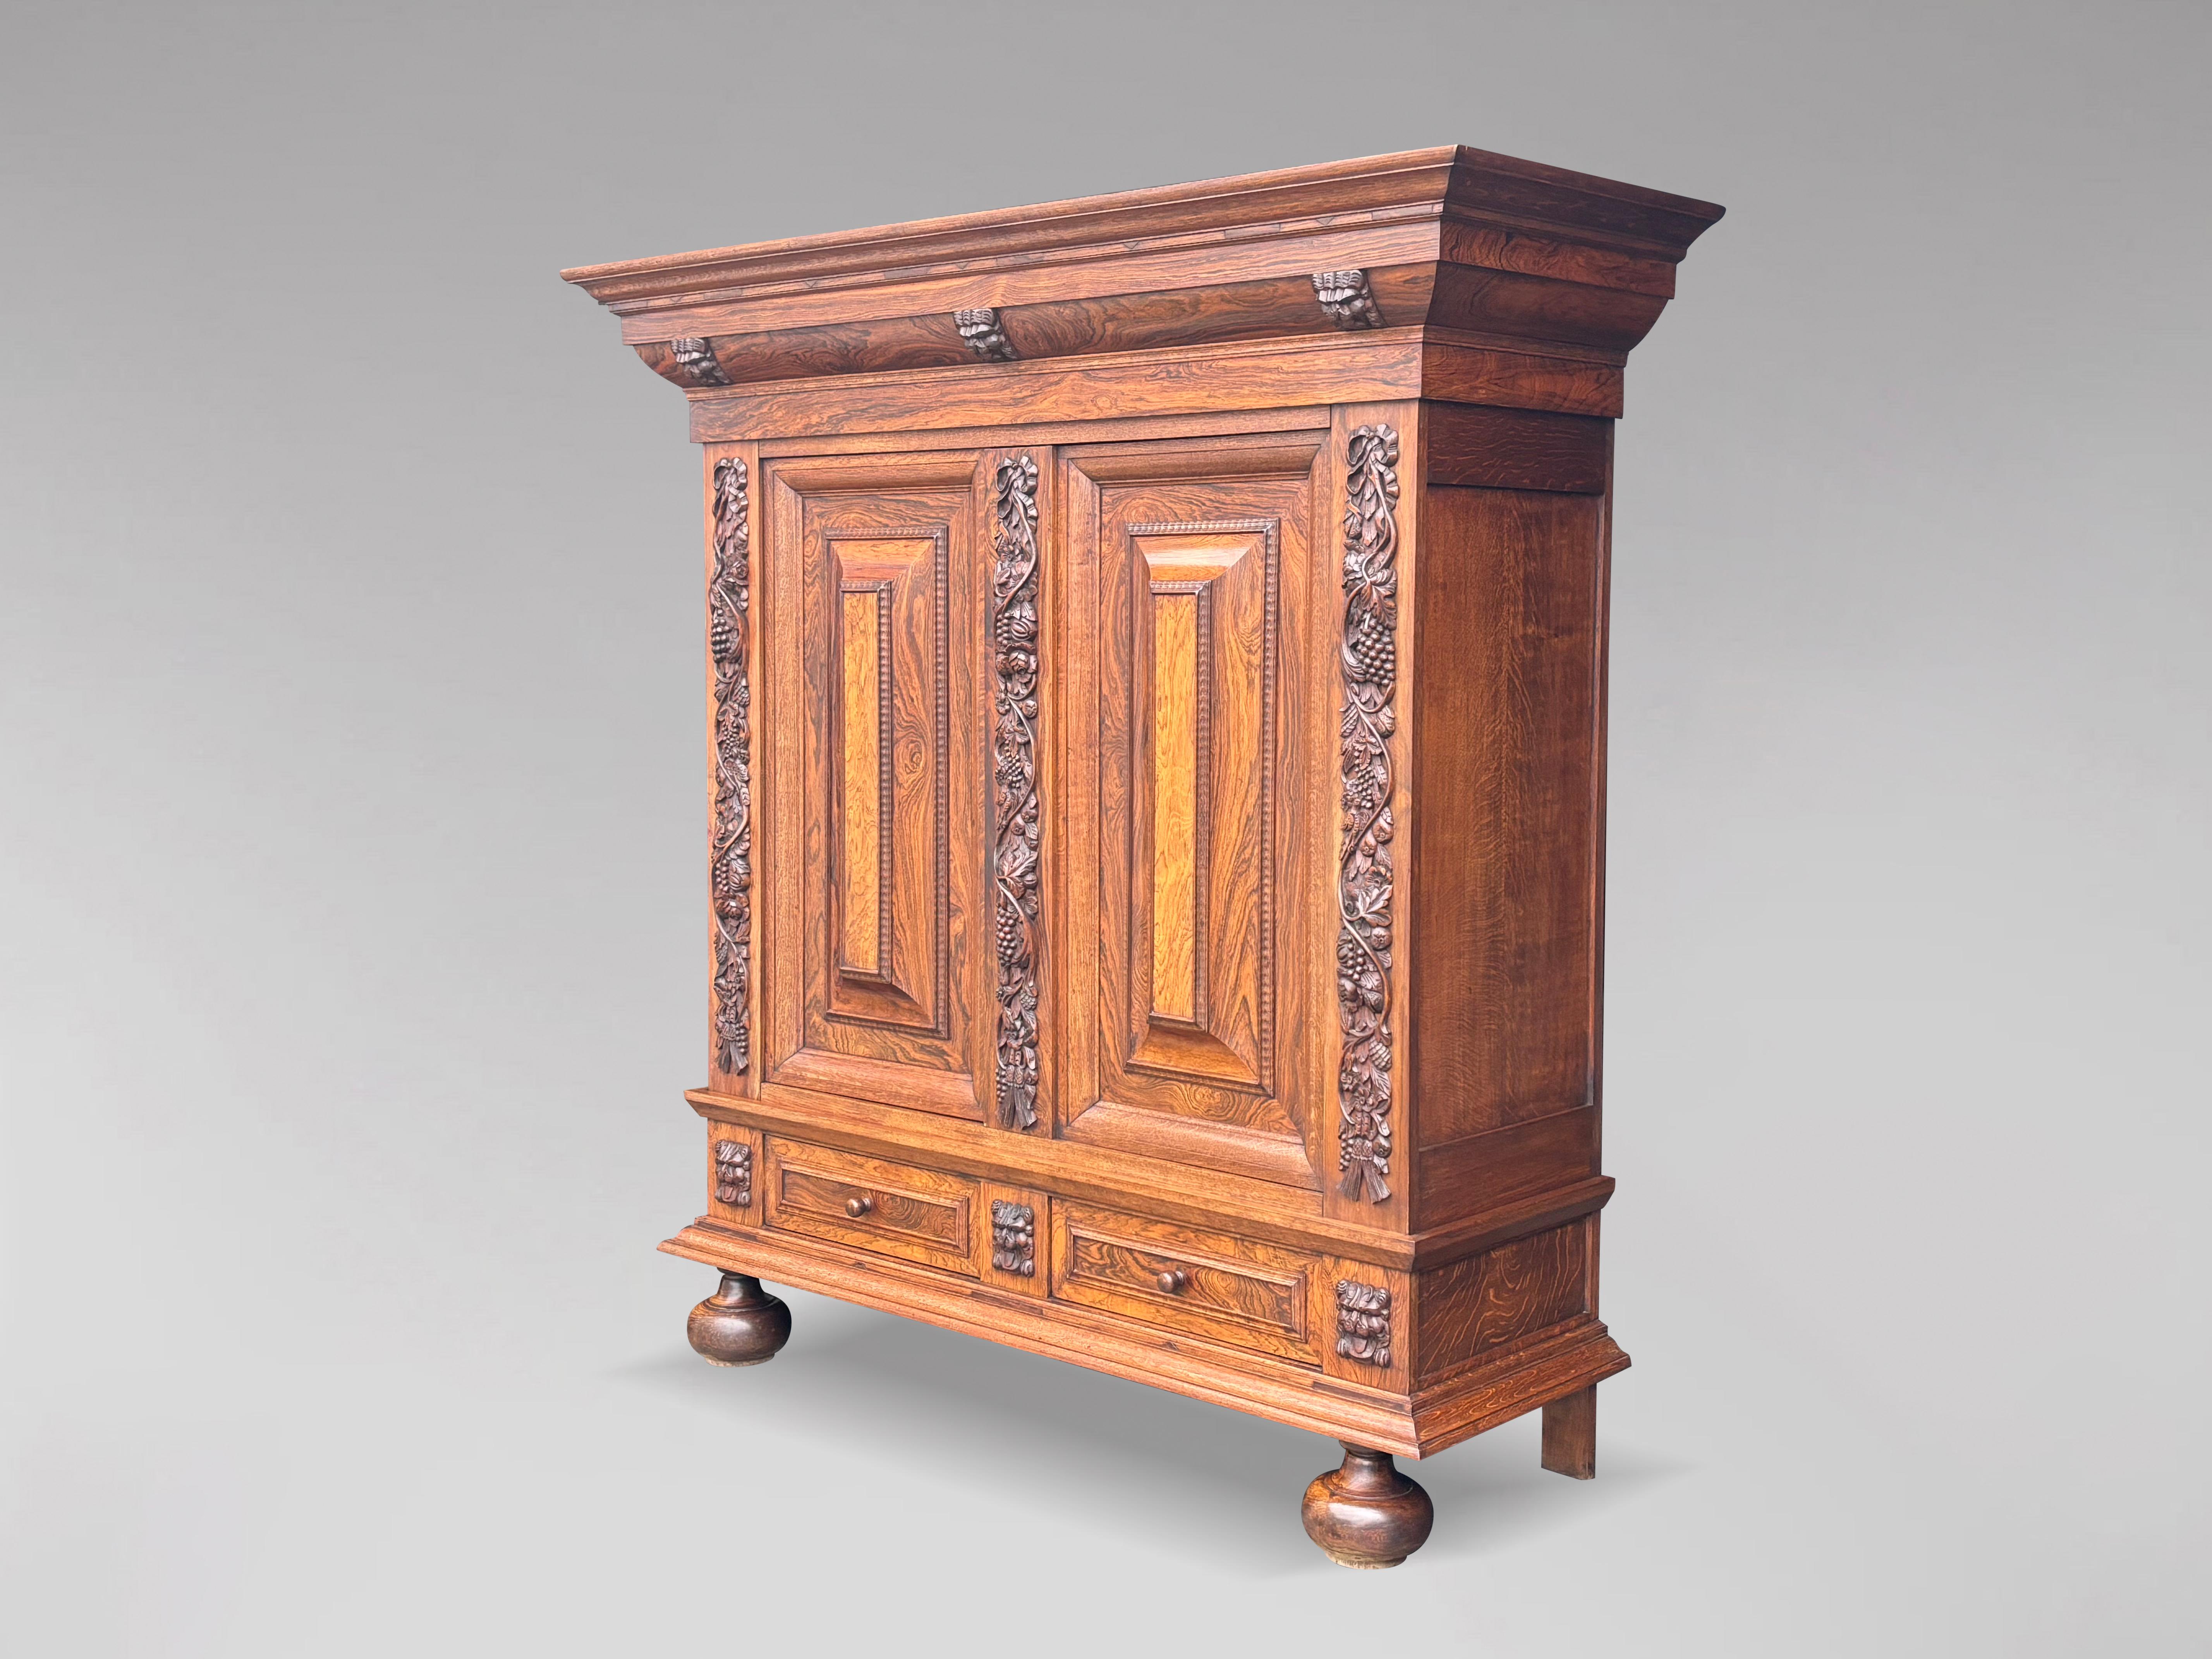 An exquisite antique mid 19th century Dutch cabinet or cupboard in the renaissance style, crafted from the finest rosewood veneers on solid oak. Moulded top cornice, above a frieze of three carved lion masks, the two central doors with deep panels